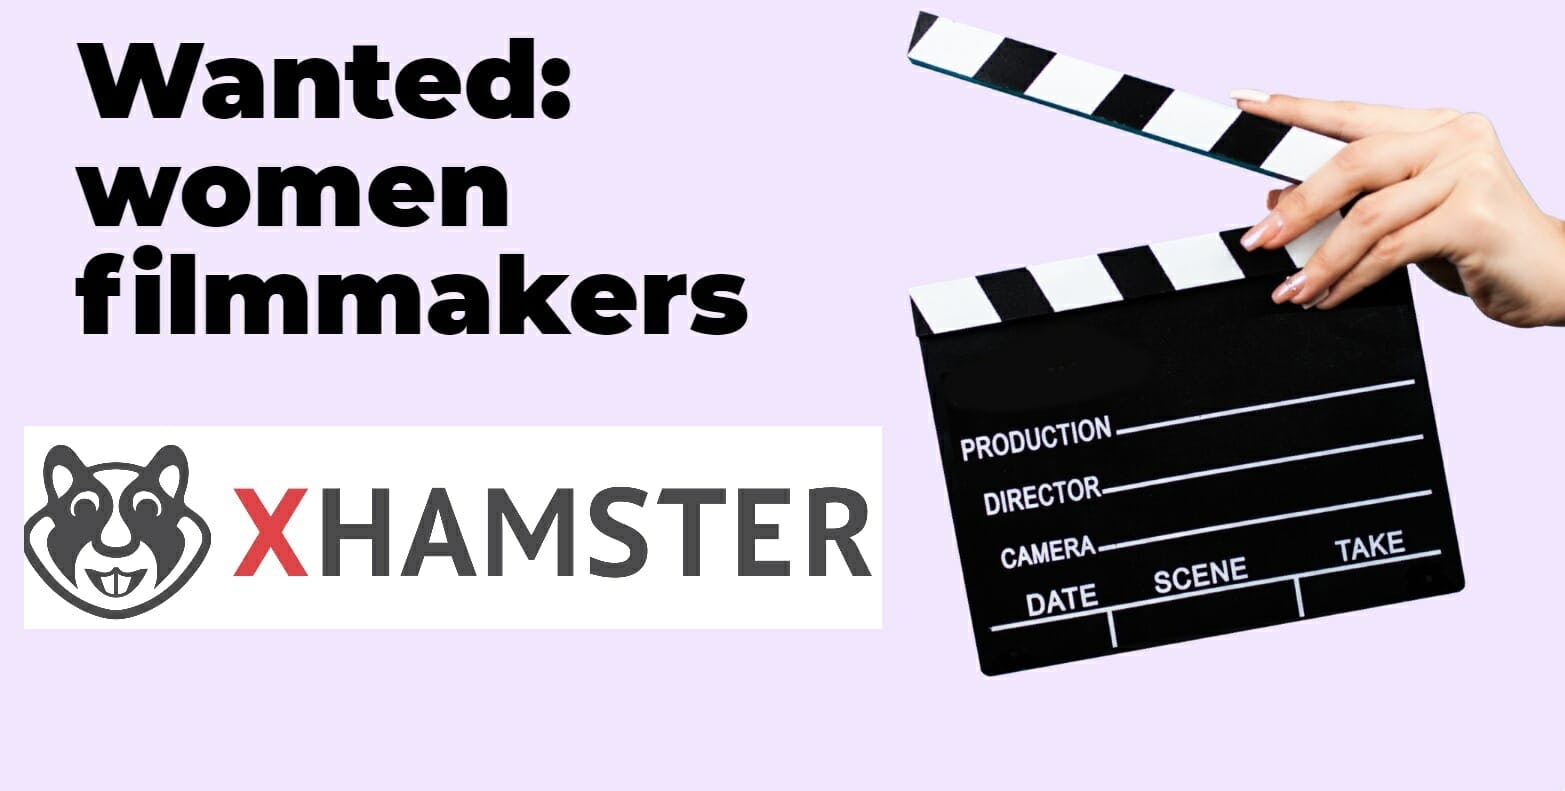 Porn site xHamster is fundraising for female adult filmmakers